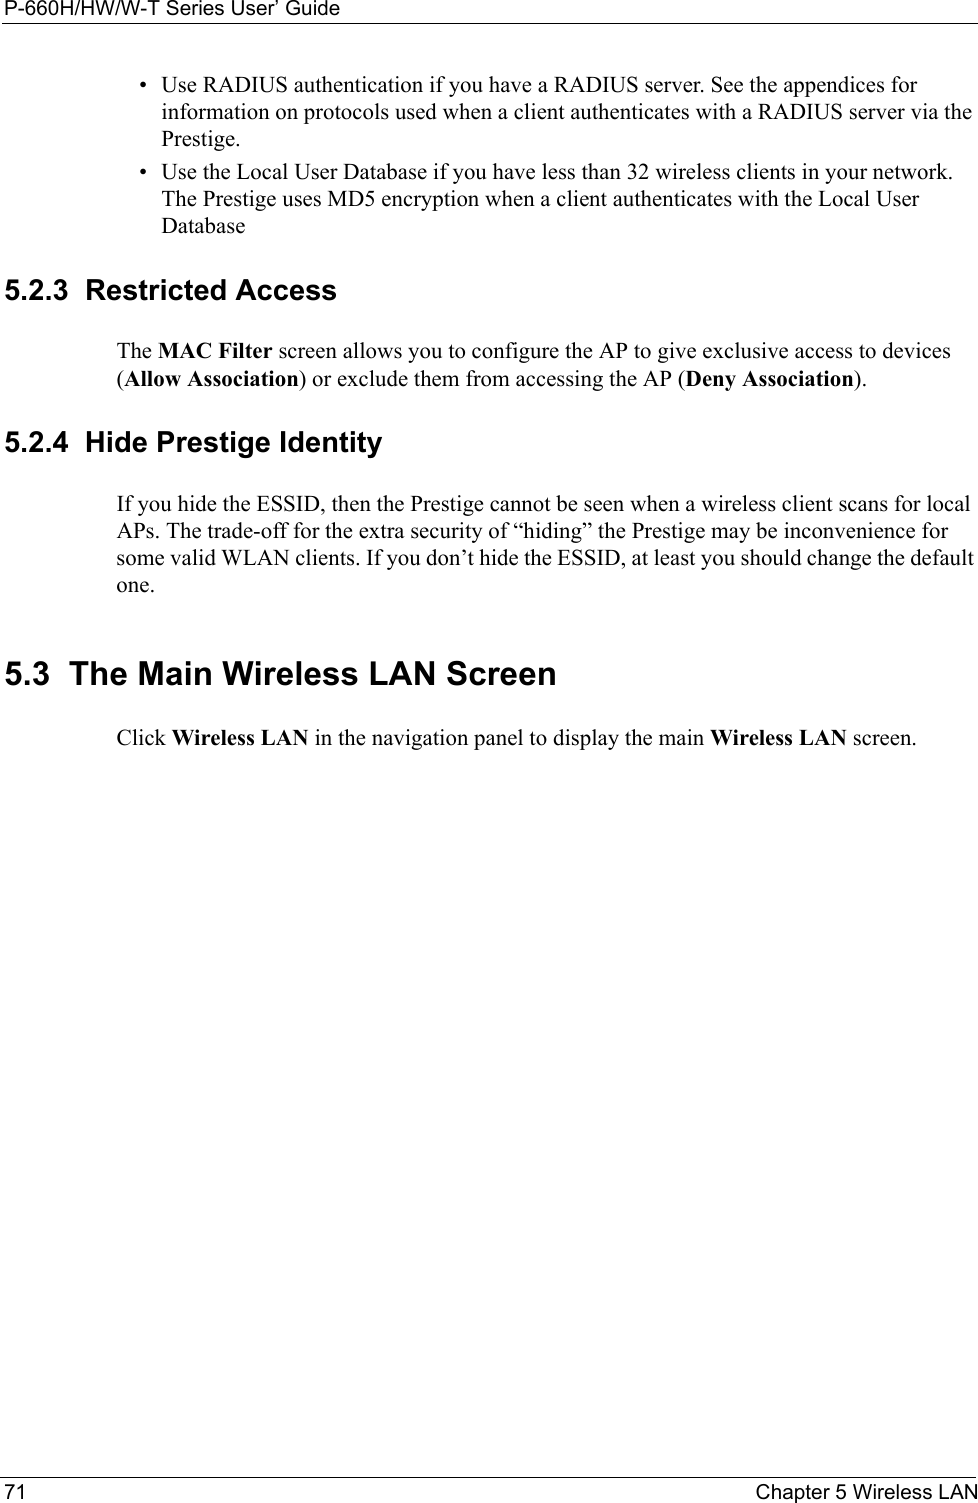 P-660H/HW/W-T Series User’ Guide71 Chapter 5 Wireless LAN• Use RADIUS authentication if you have a RADIUS server. See the appendices for information on protocols used when a client authenticates with a RADIUS server via the Prestige.• Use the Local User Database if you have less than 32 wireless clients in your network. The Prestige uses MD5 encryption when a client authenticates with the Local User Database 5.2.3  Restricted AccessThe MAC Filter screen allows you to configure the AP to give exclusive access to devices (Allow Association) or exclude them from accessing the AP (Deny Association). 5.2.4  Hide Prestige IdentityIf you hide the ESSID, then the Prestige cannot be seen when a wireless client scans for local APs. The trade-off for the extra security of “hiding” the Prestige may be inconvenience for some valid WLAN clients. If you don’t hide the ESSID, at least you should change the default one.5.3  The Main Wireless LAN Screen  Click Wireless LAN in the navigation panel to display the main Wireless LAN screen. 